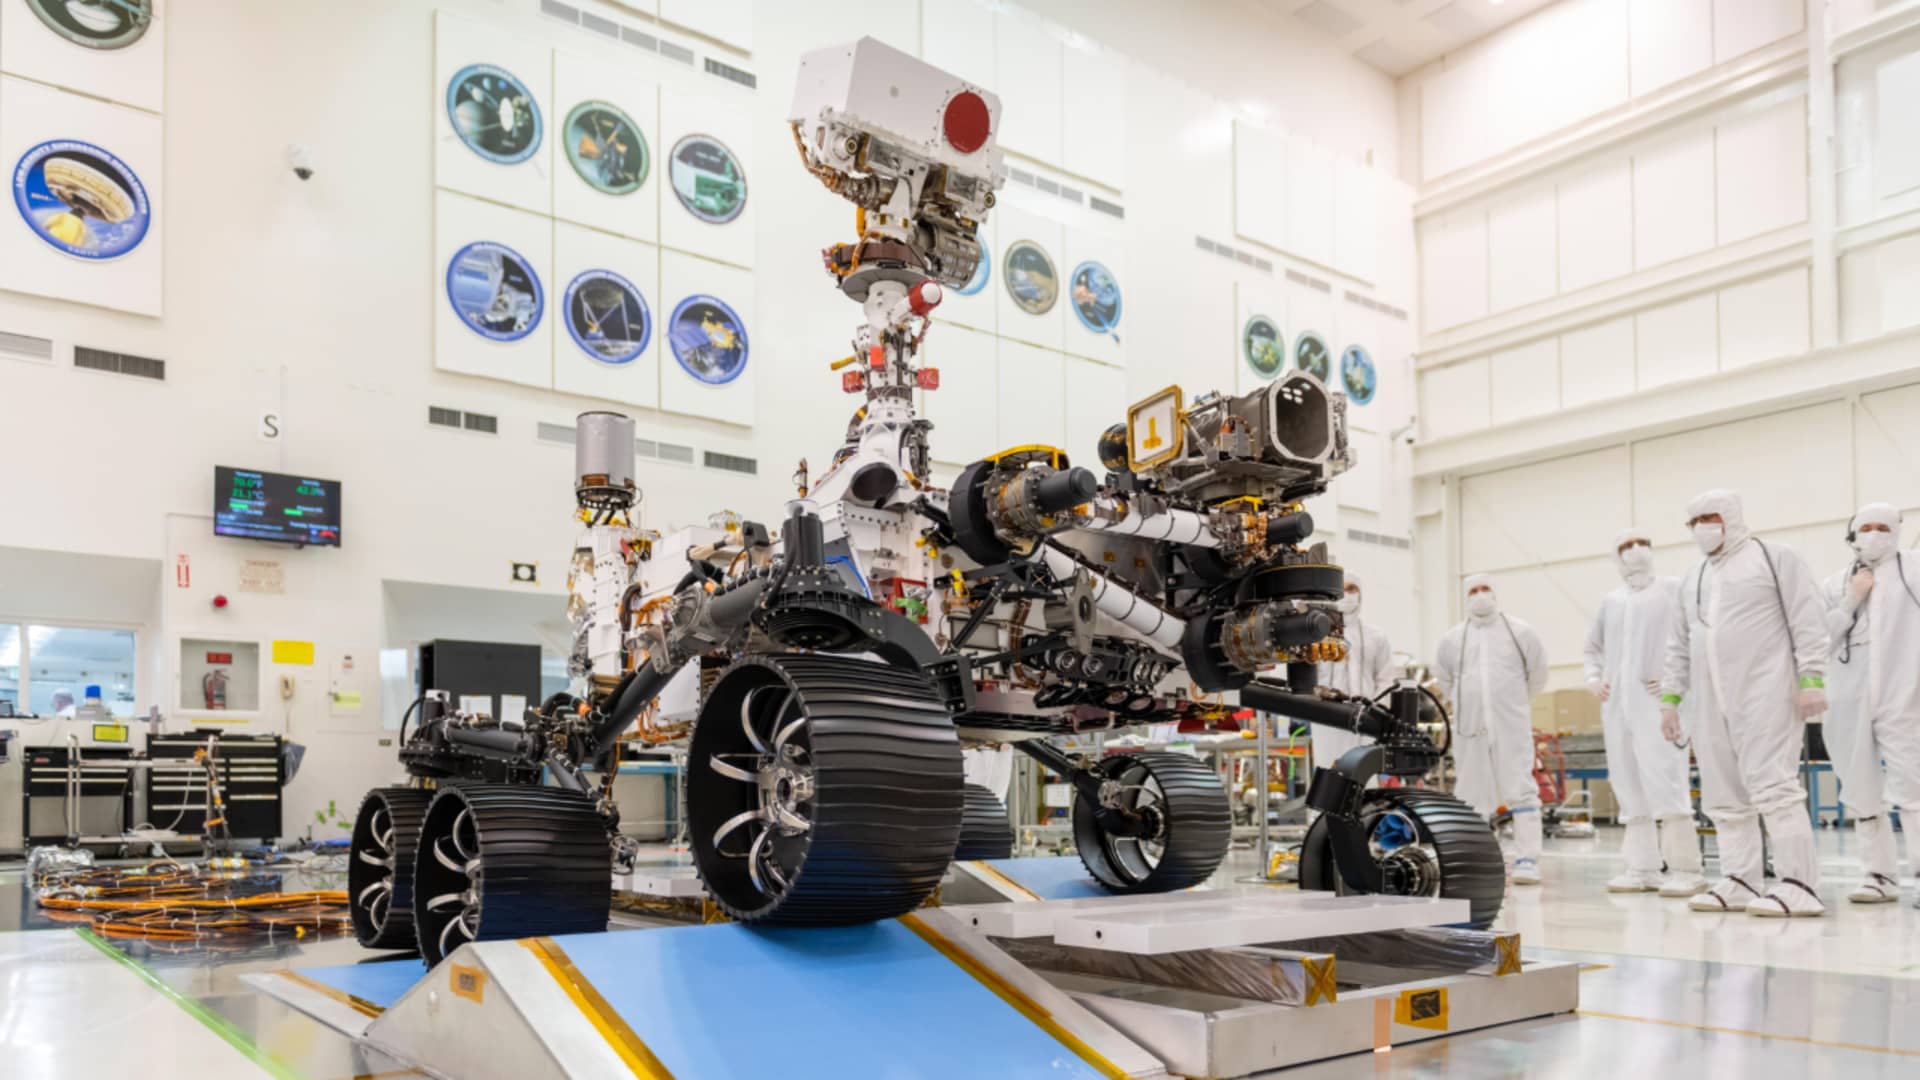 Engineers observe the first driving test for NASA's Mars 2020 Perseverance rover in a clean room at NASA's Jet Propulsion Laboratory in Pasadena, California, on Dec. 17, 2019.